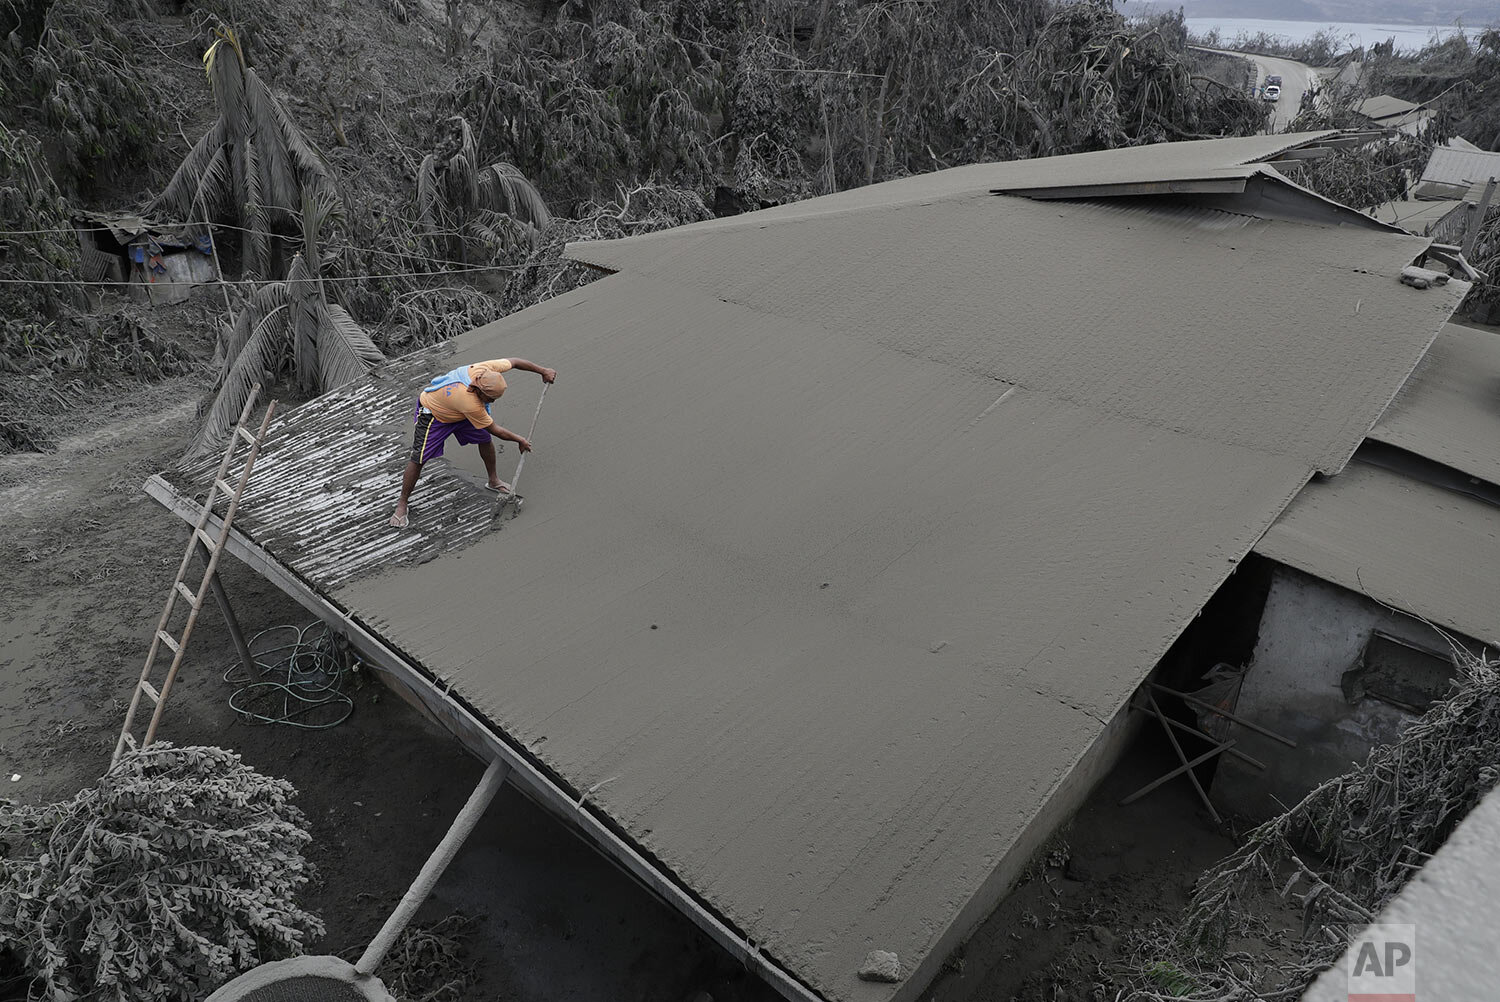  A resident clears volcanic ash from his roof in Laurel, Batangas province, southern Philippines on Tuesday, Jan. 14, 2020. (AP Photo/Aaron Favila) 